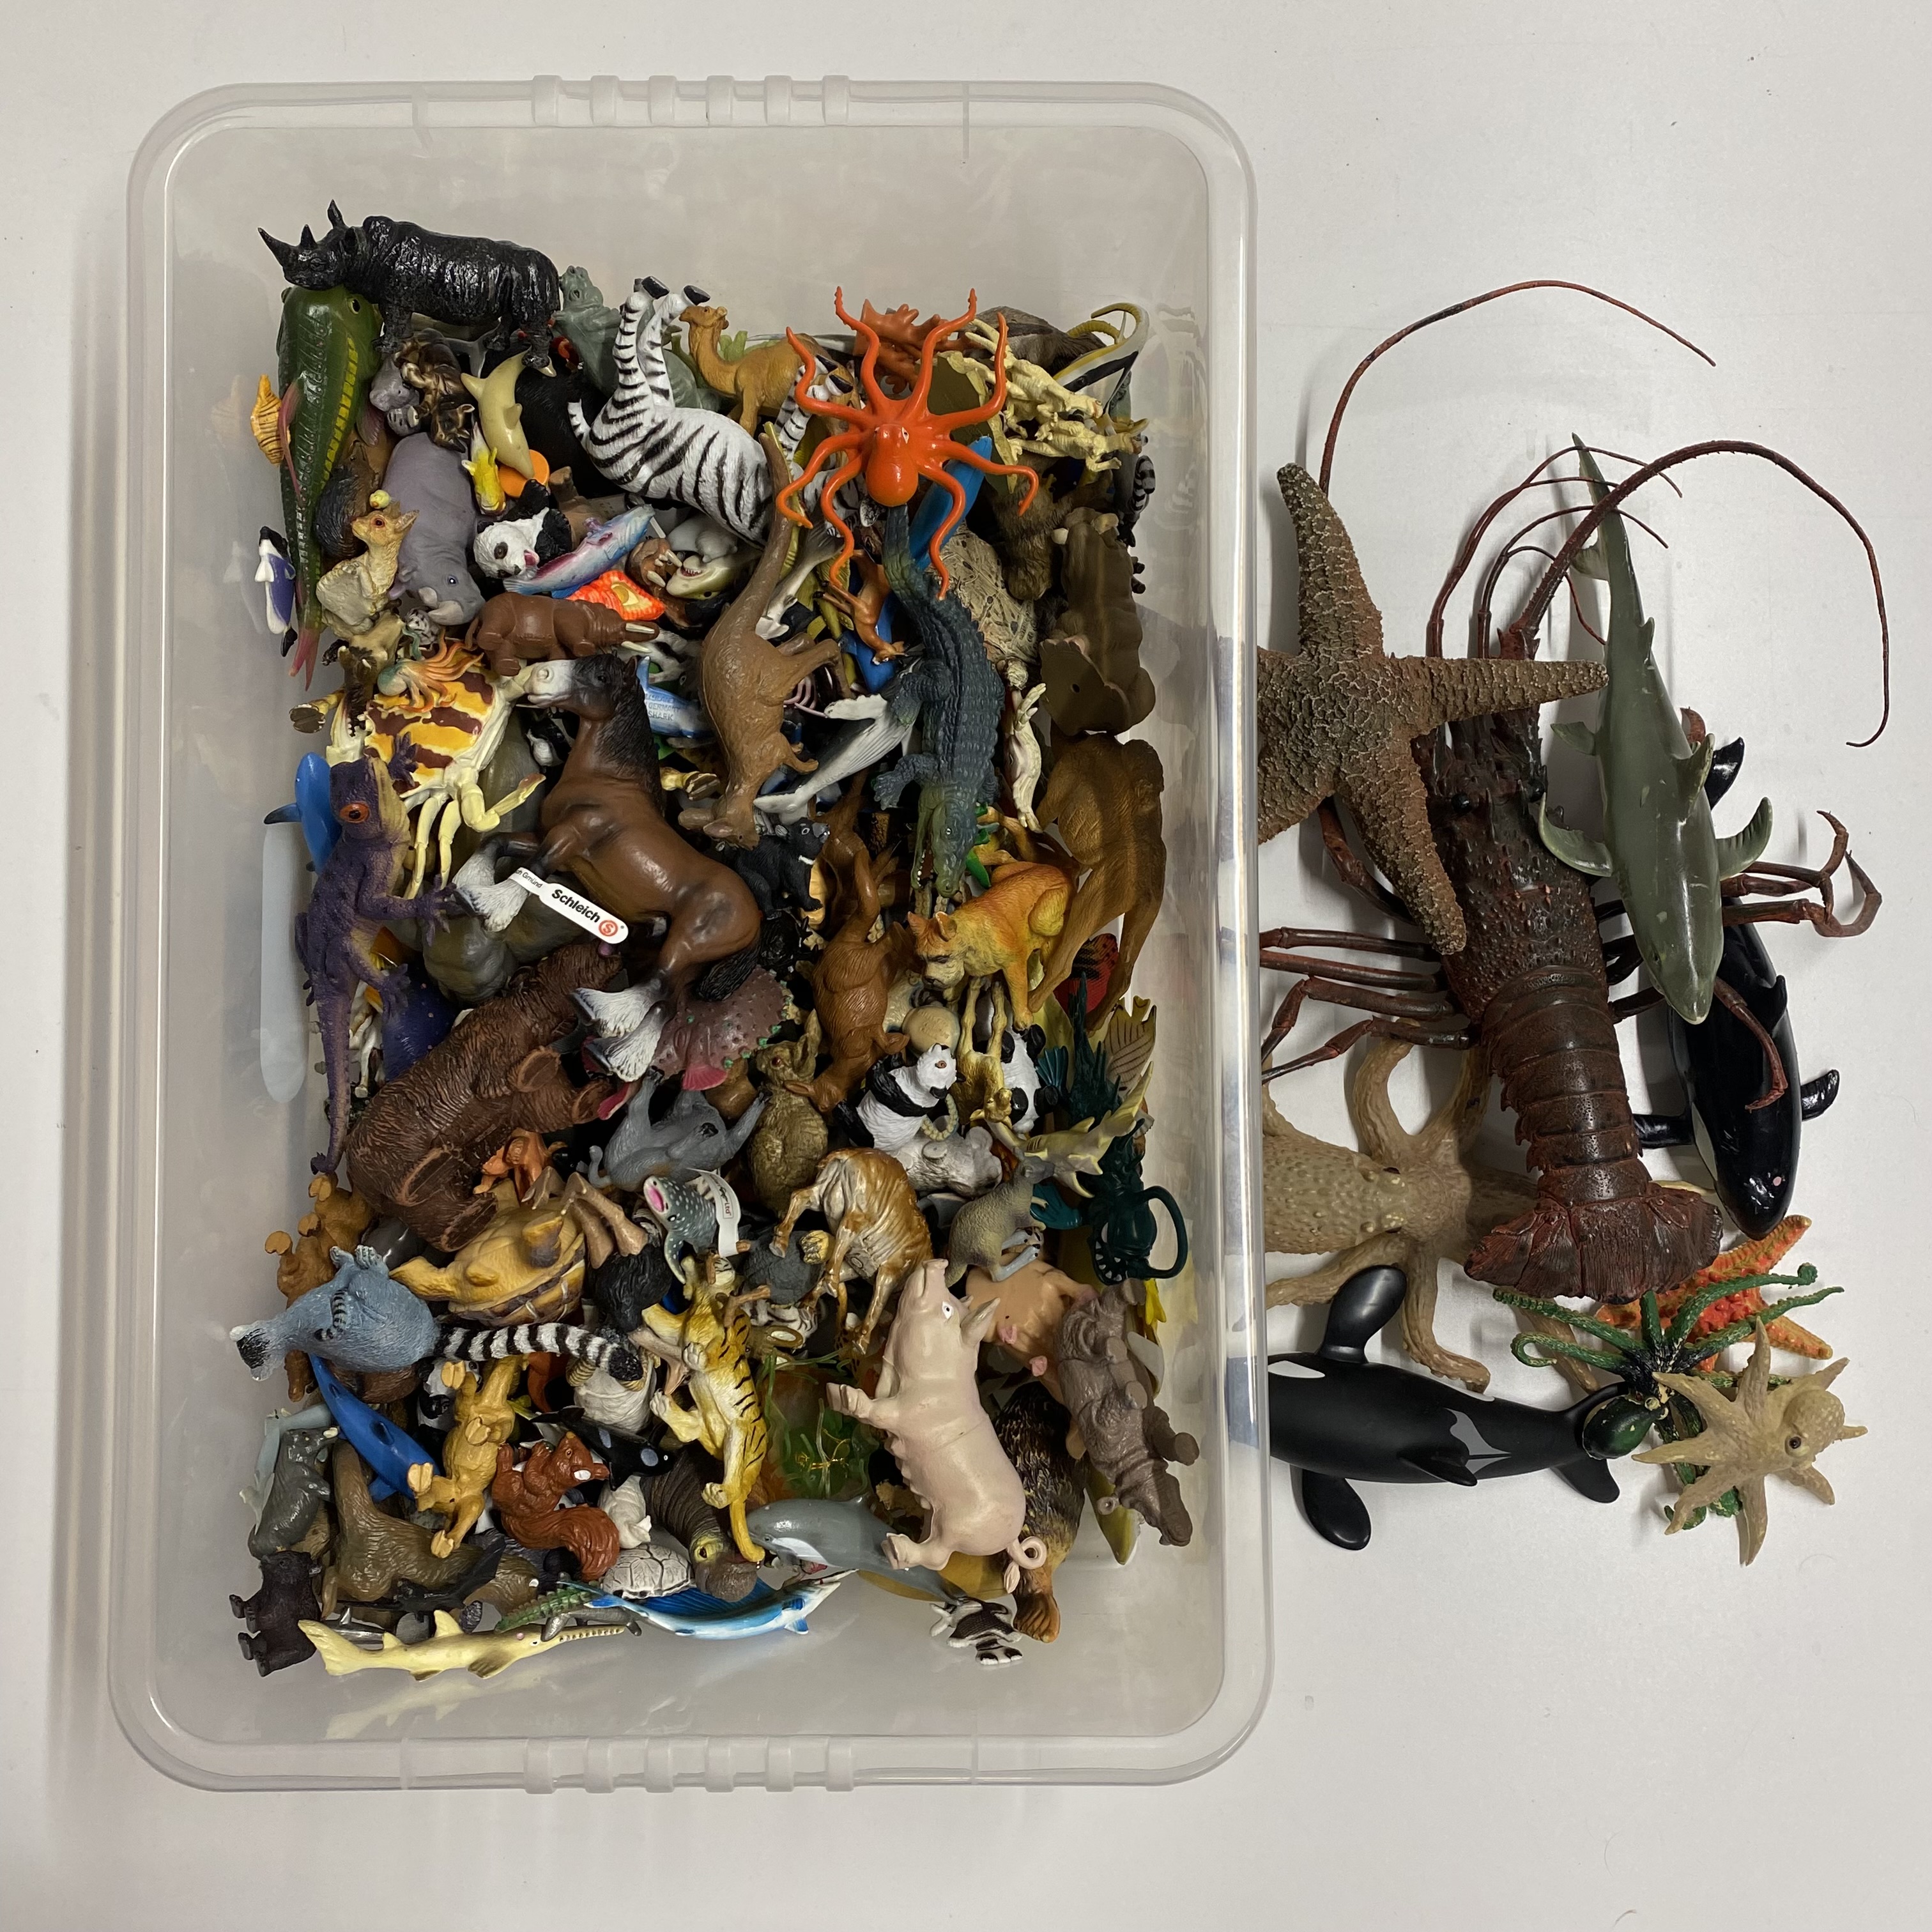 A collection of various animals and marine wildlife toys.